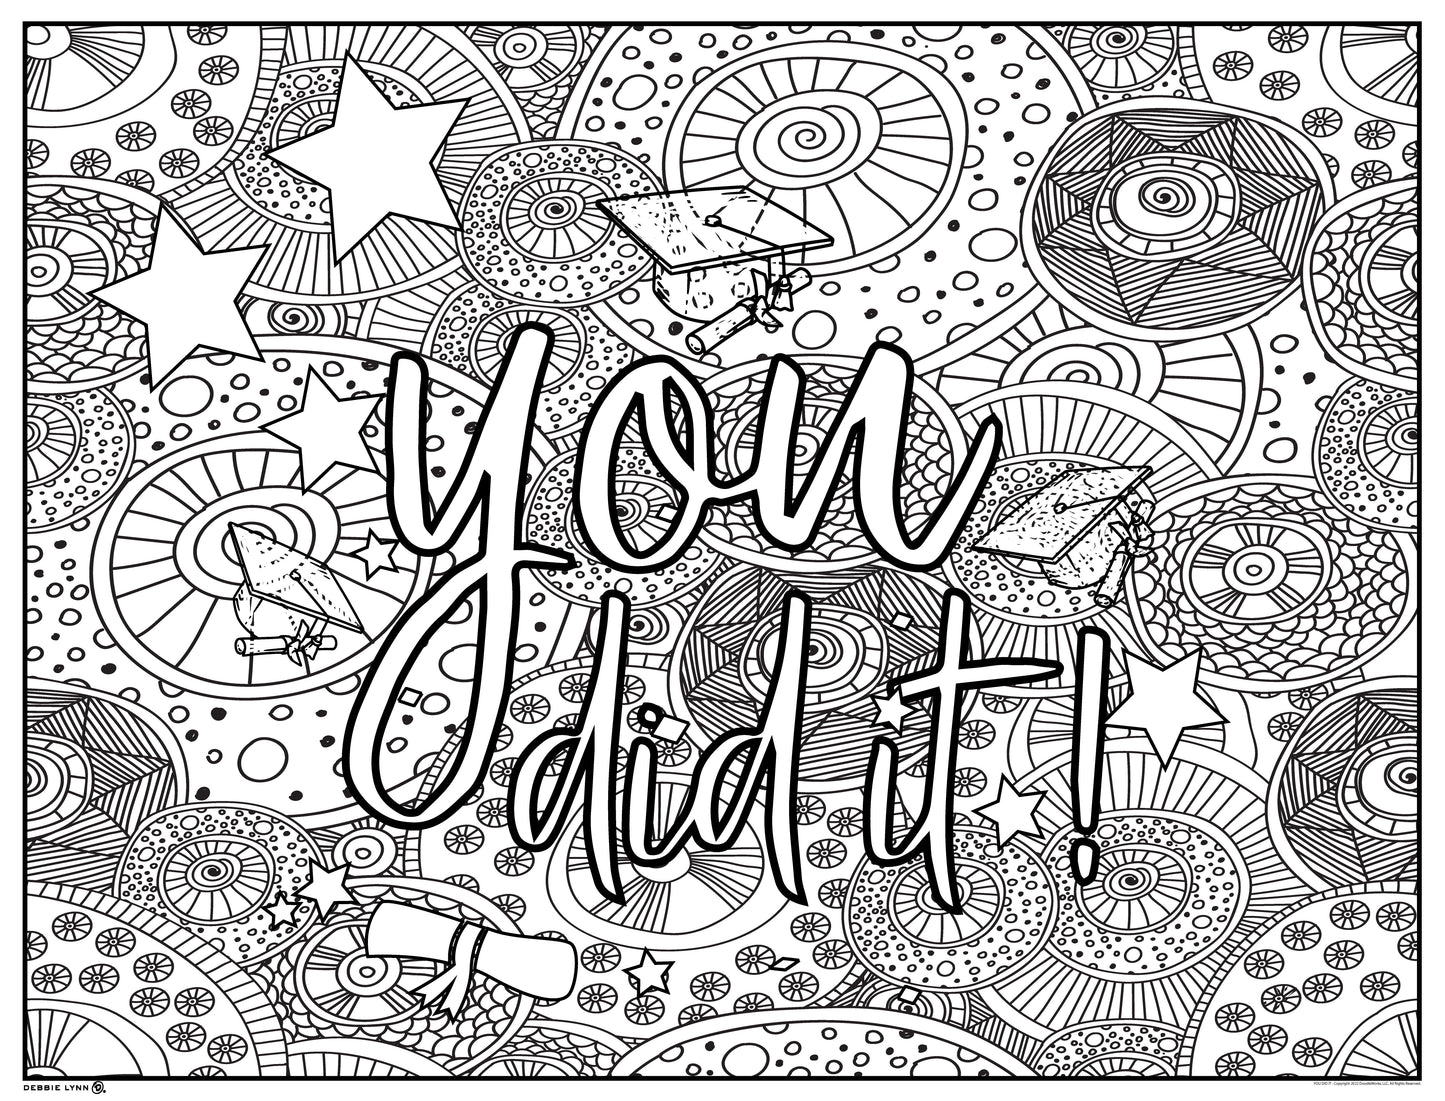 You Did It Graduate Personalized Giant Coloring Poster 46"x60"